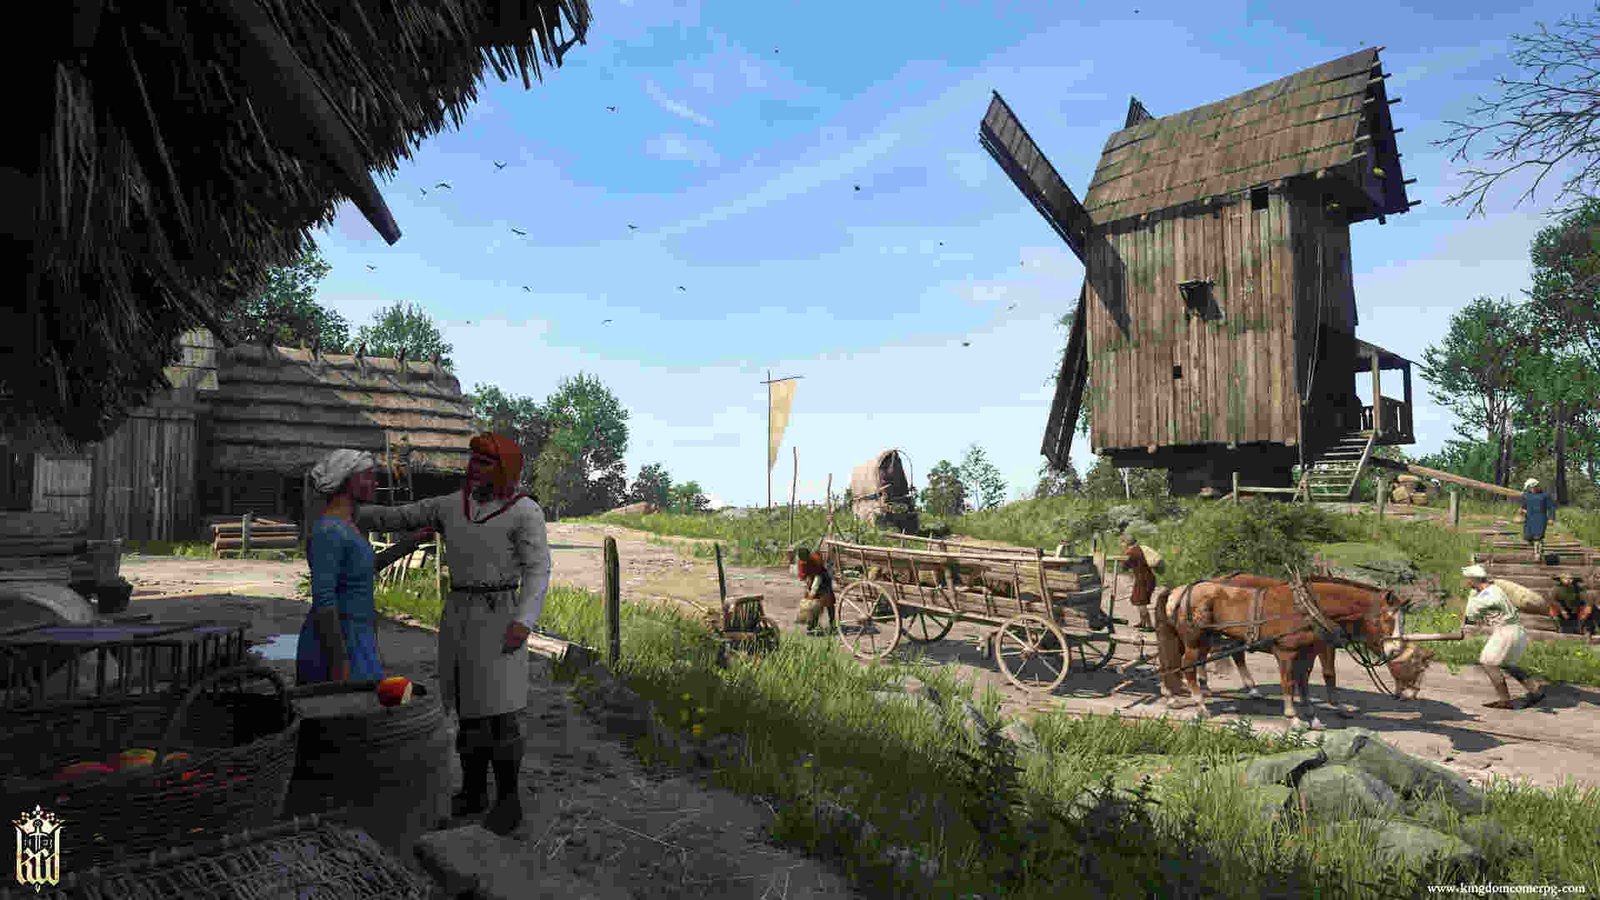 Kingdom Come Deliverance Steam Deck crashing on Steam Deck: How to fix it